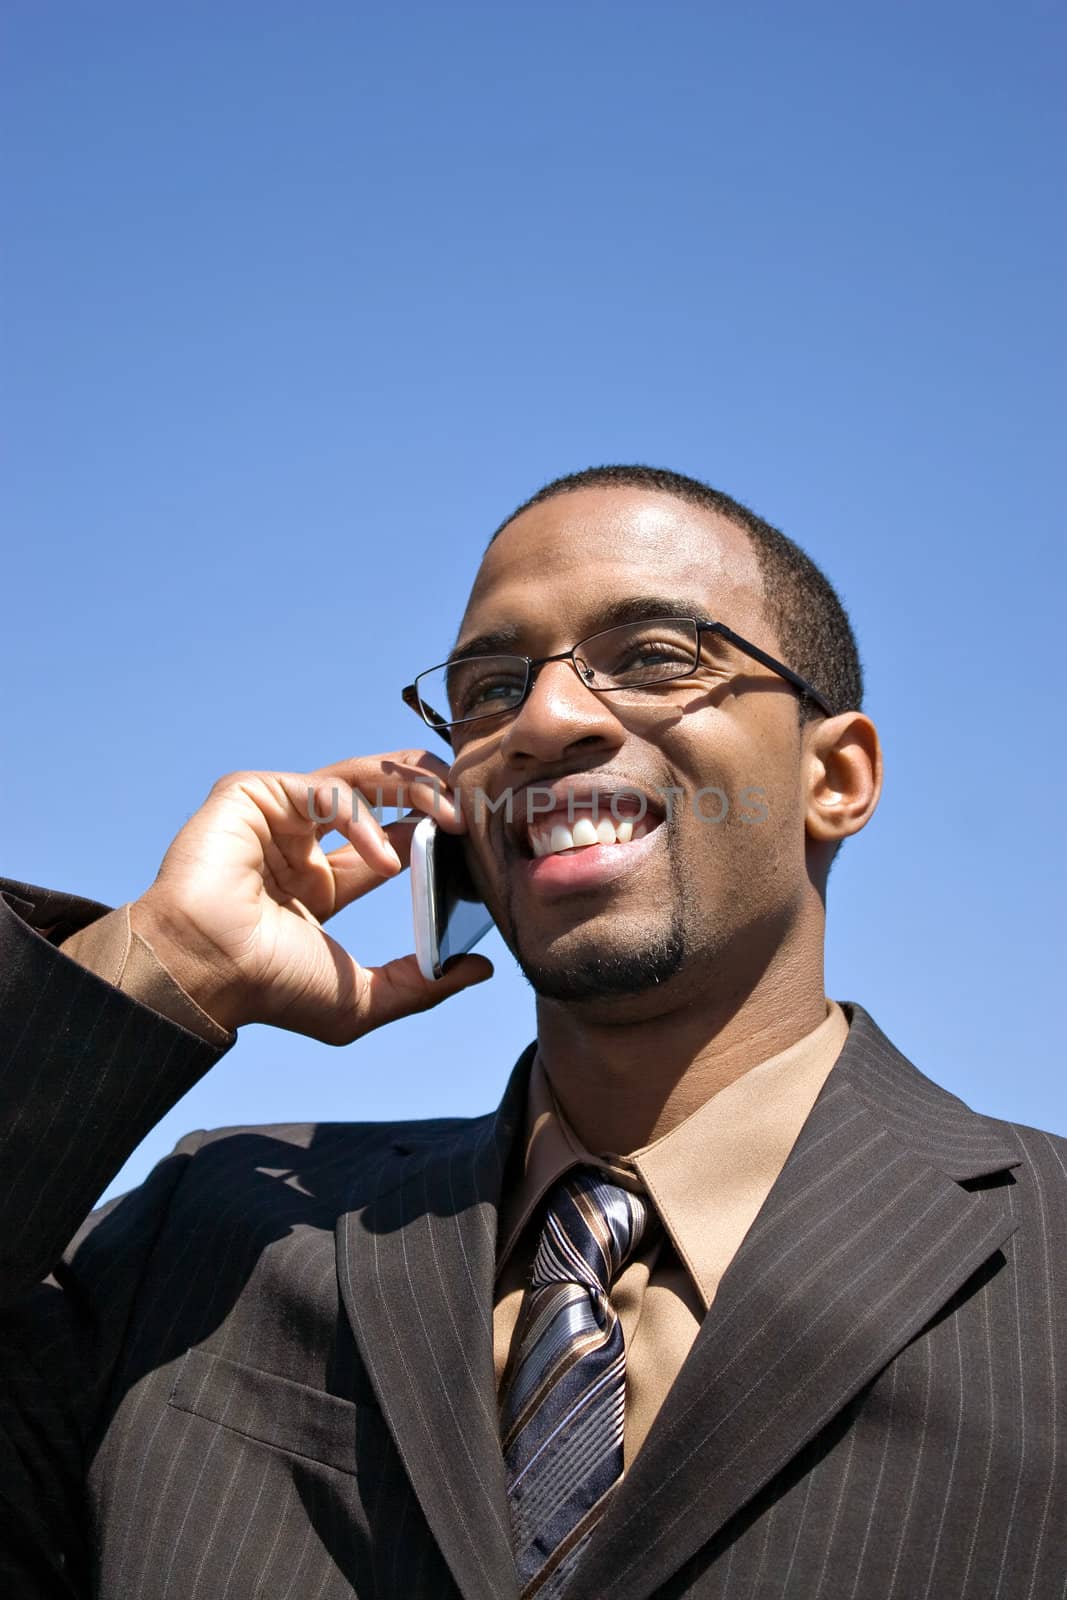 A young business professional talking on his wireless mobile phone.